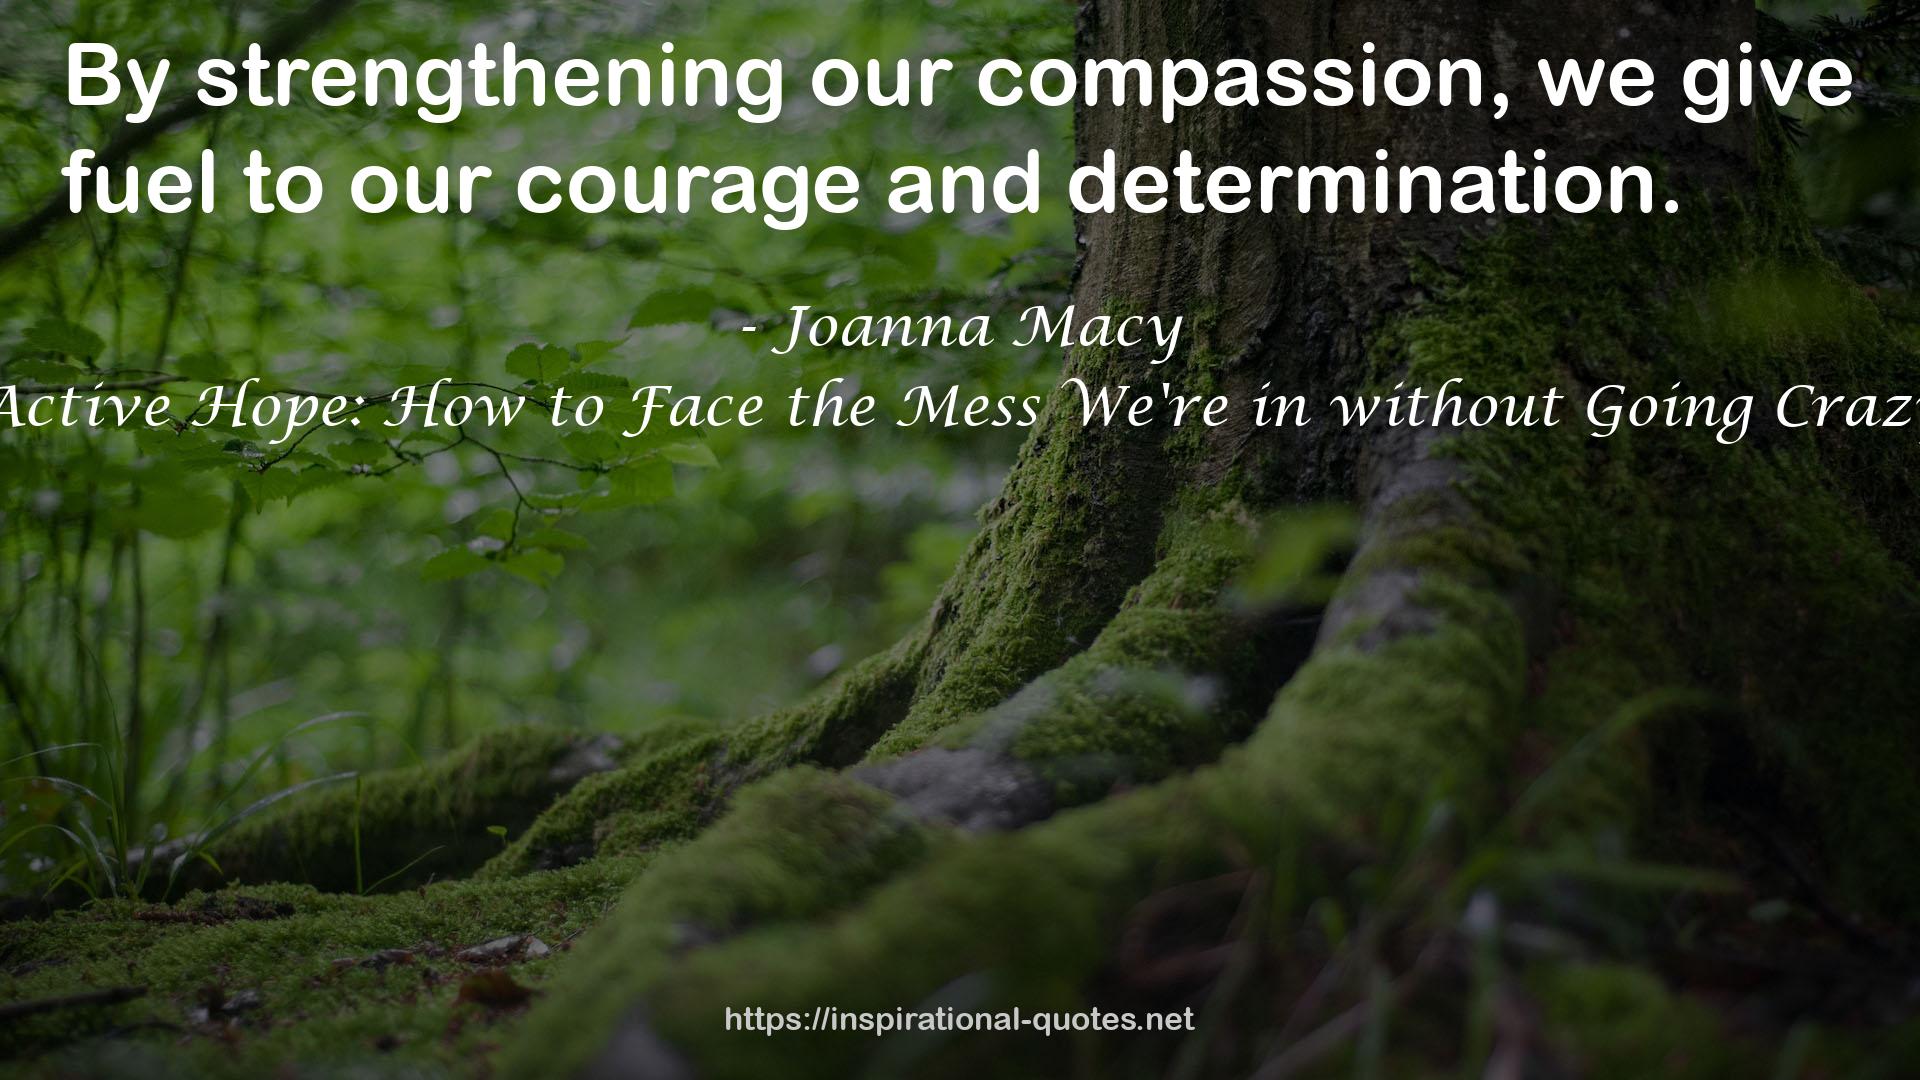 Active Hope: How to Face the Mess We're in without Going Crazy QUOTES